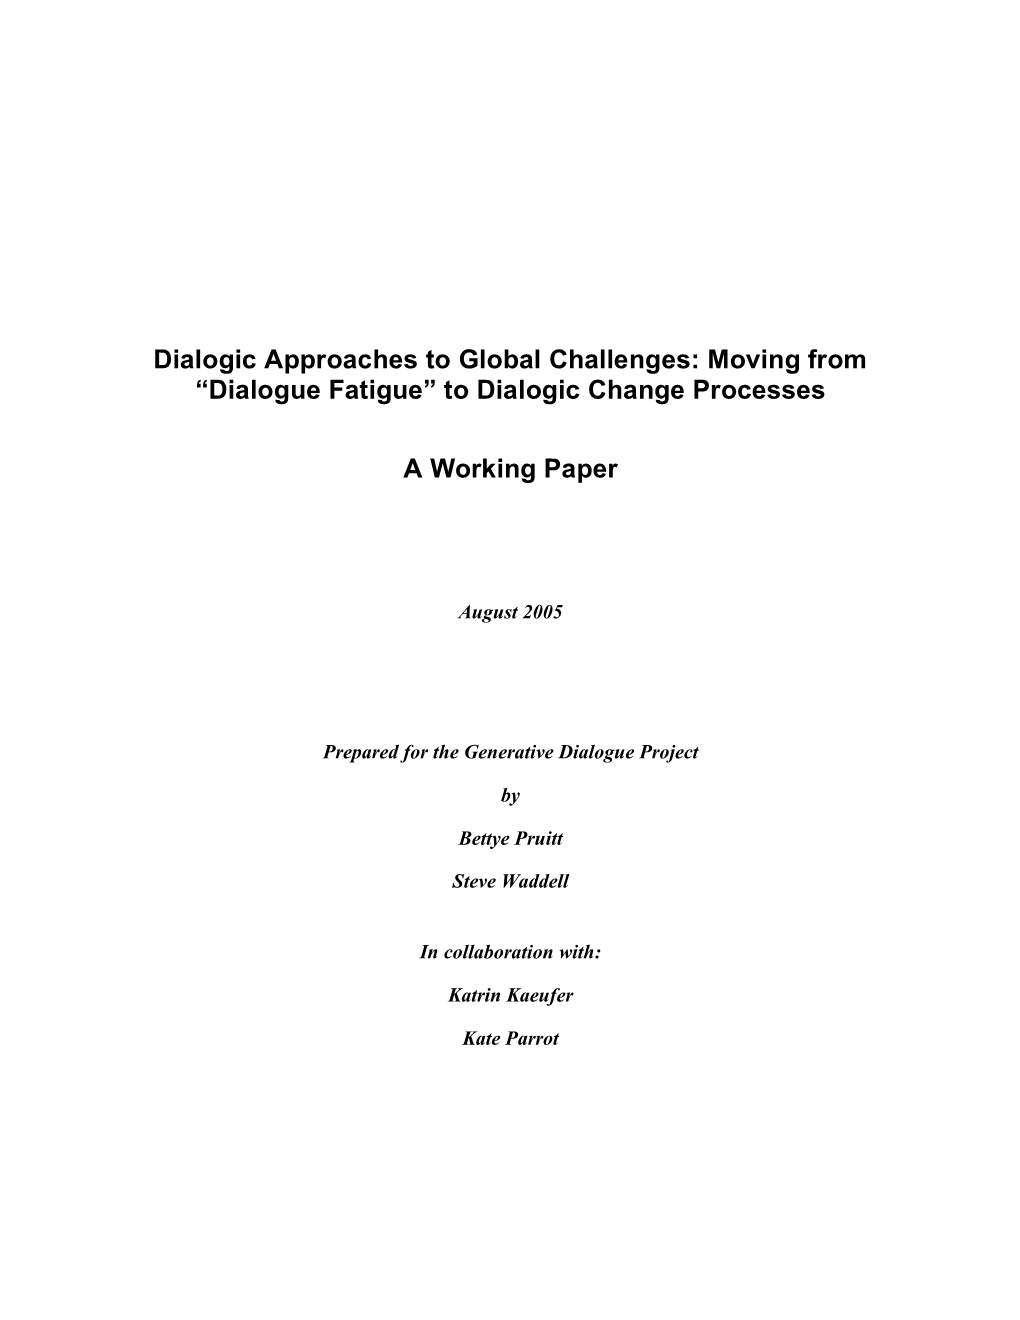 Dialogic Approaches to Global Challenges: Moving from “Dialogue Fatigue” to Dialogic Change Processes